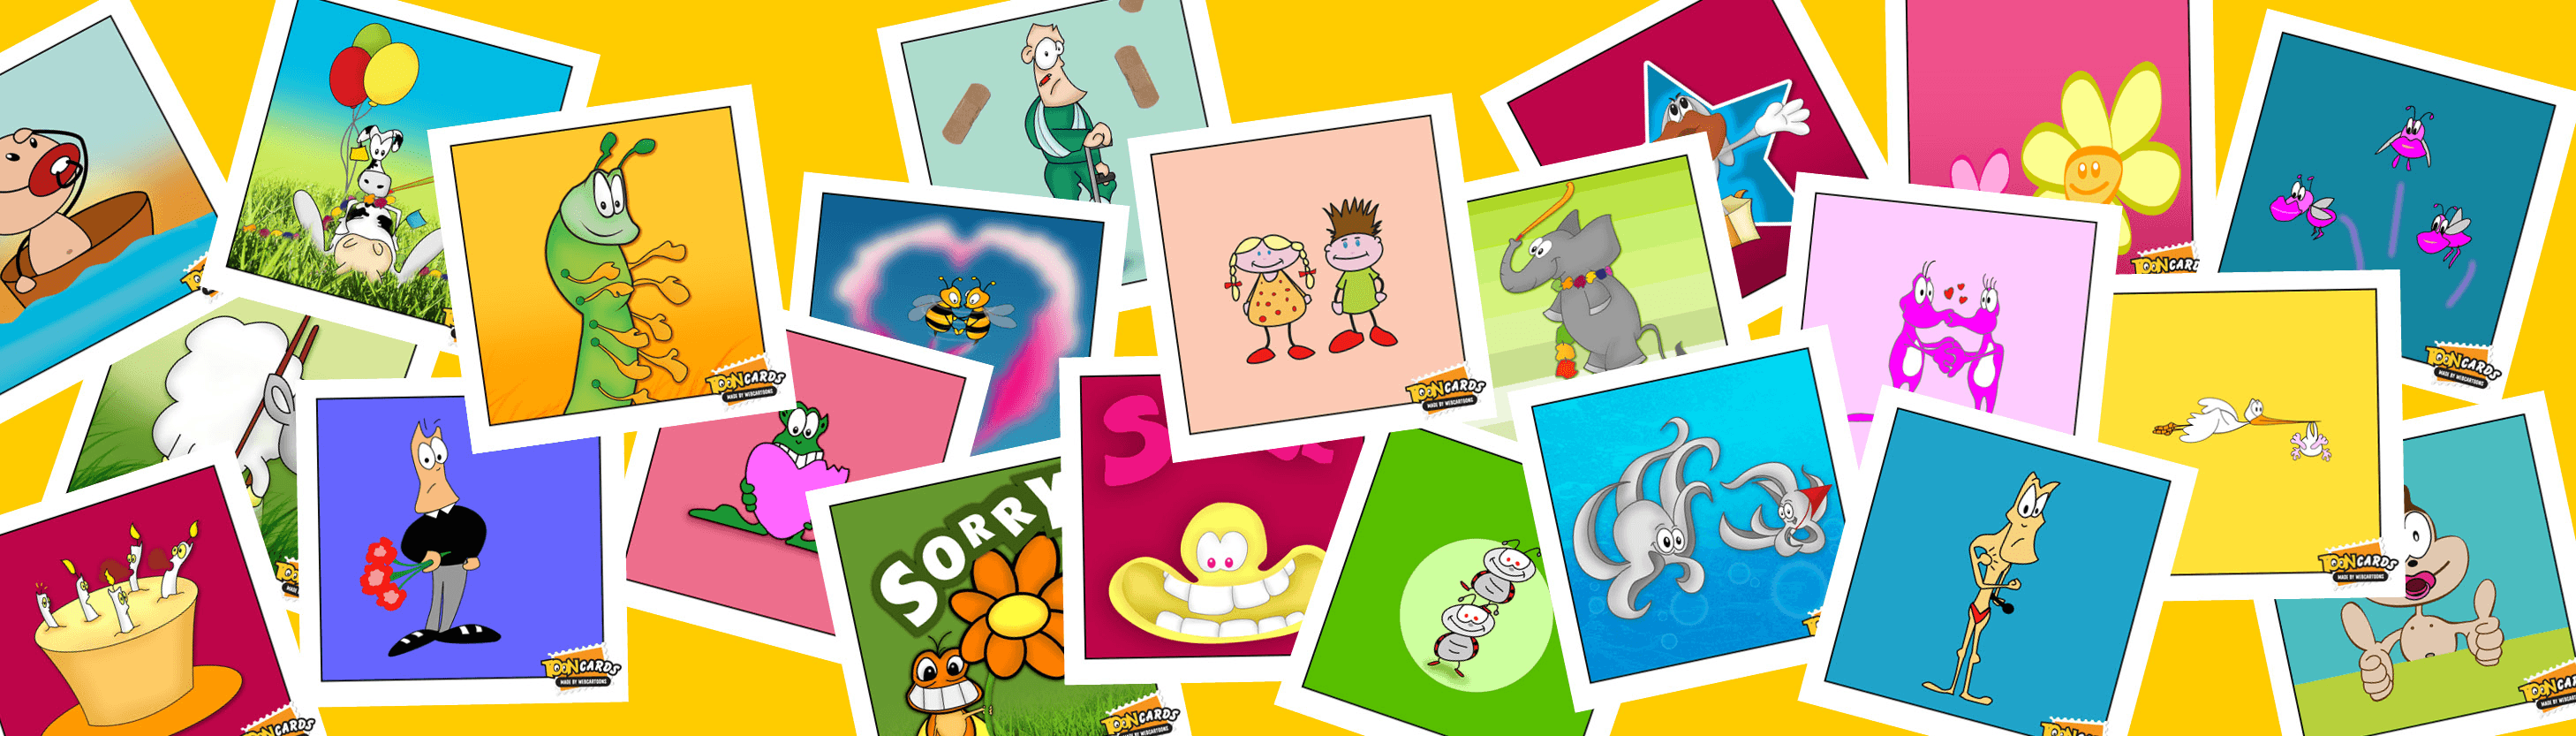 ToonCards banner